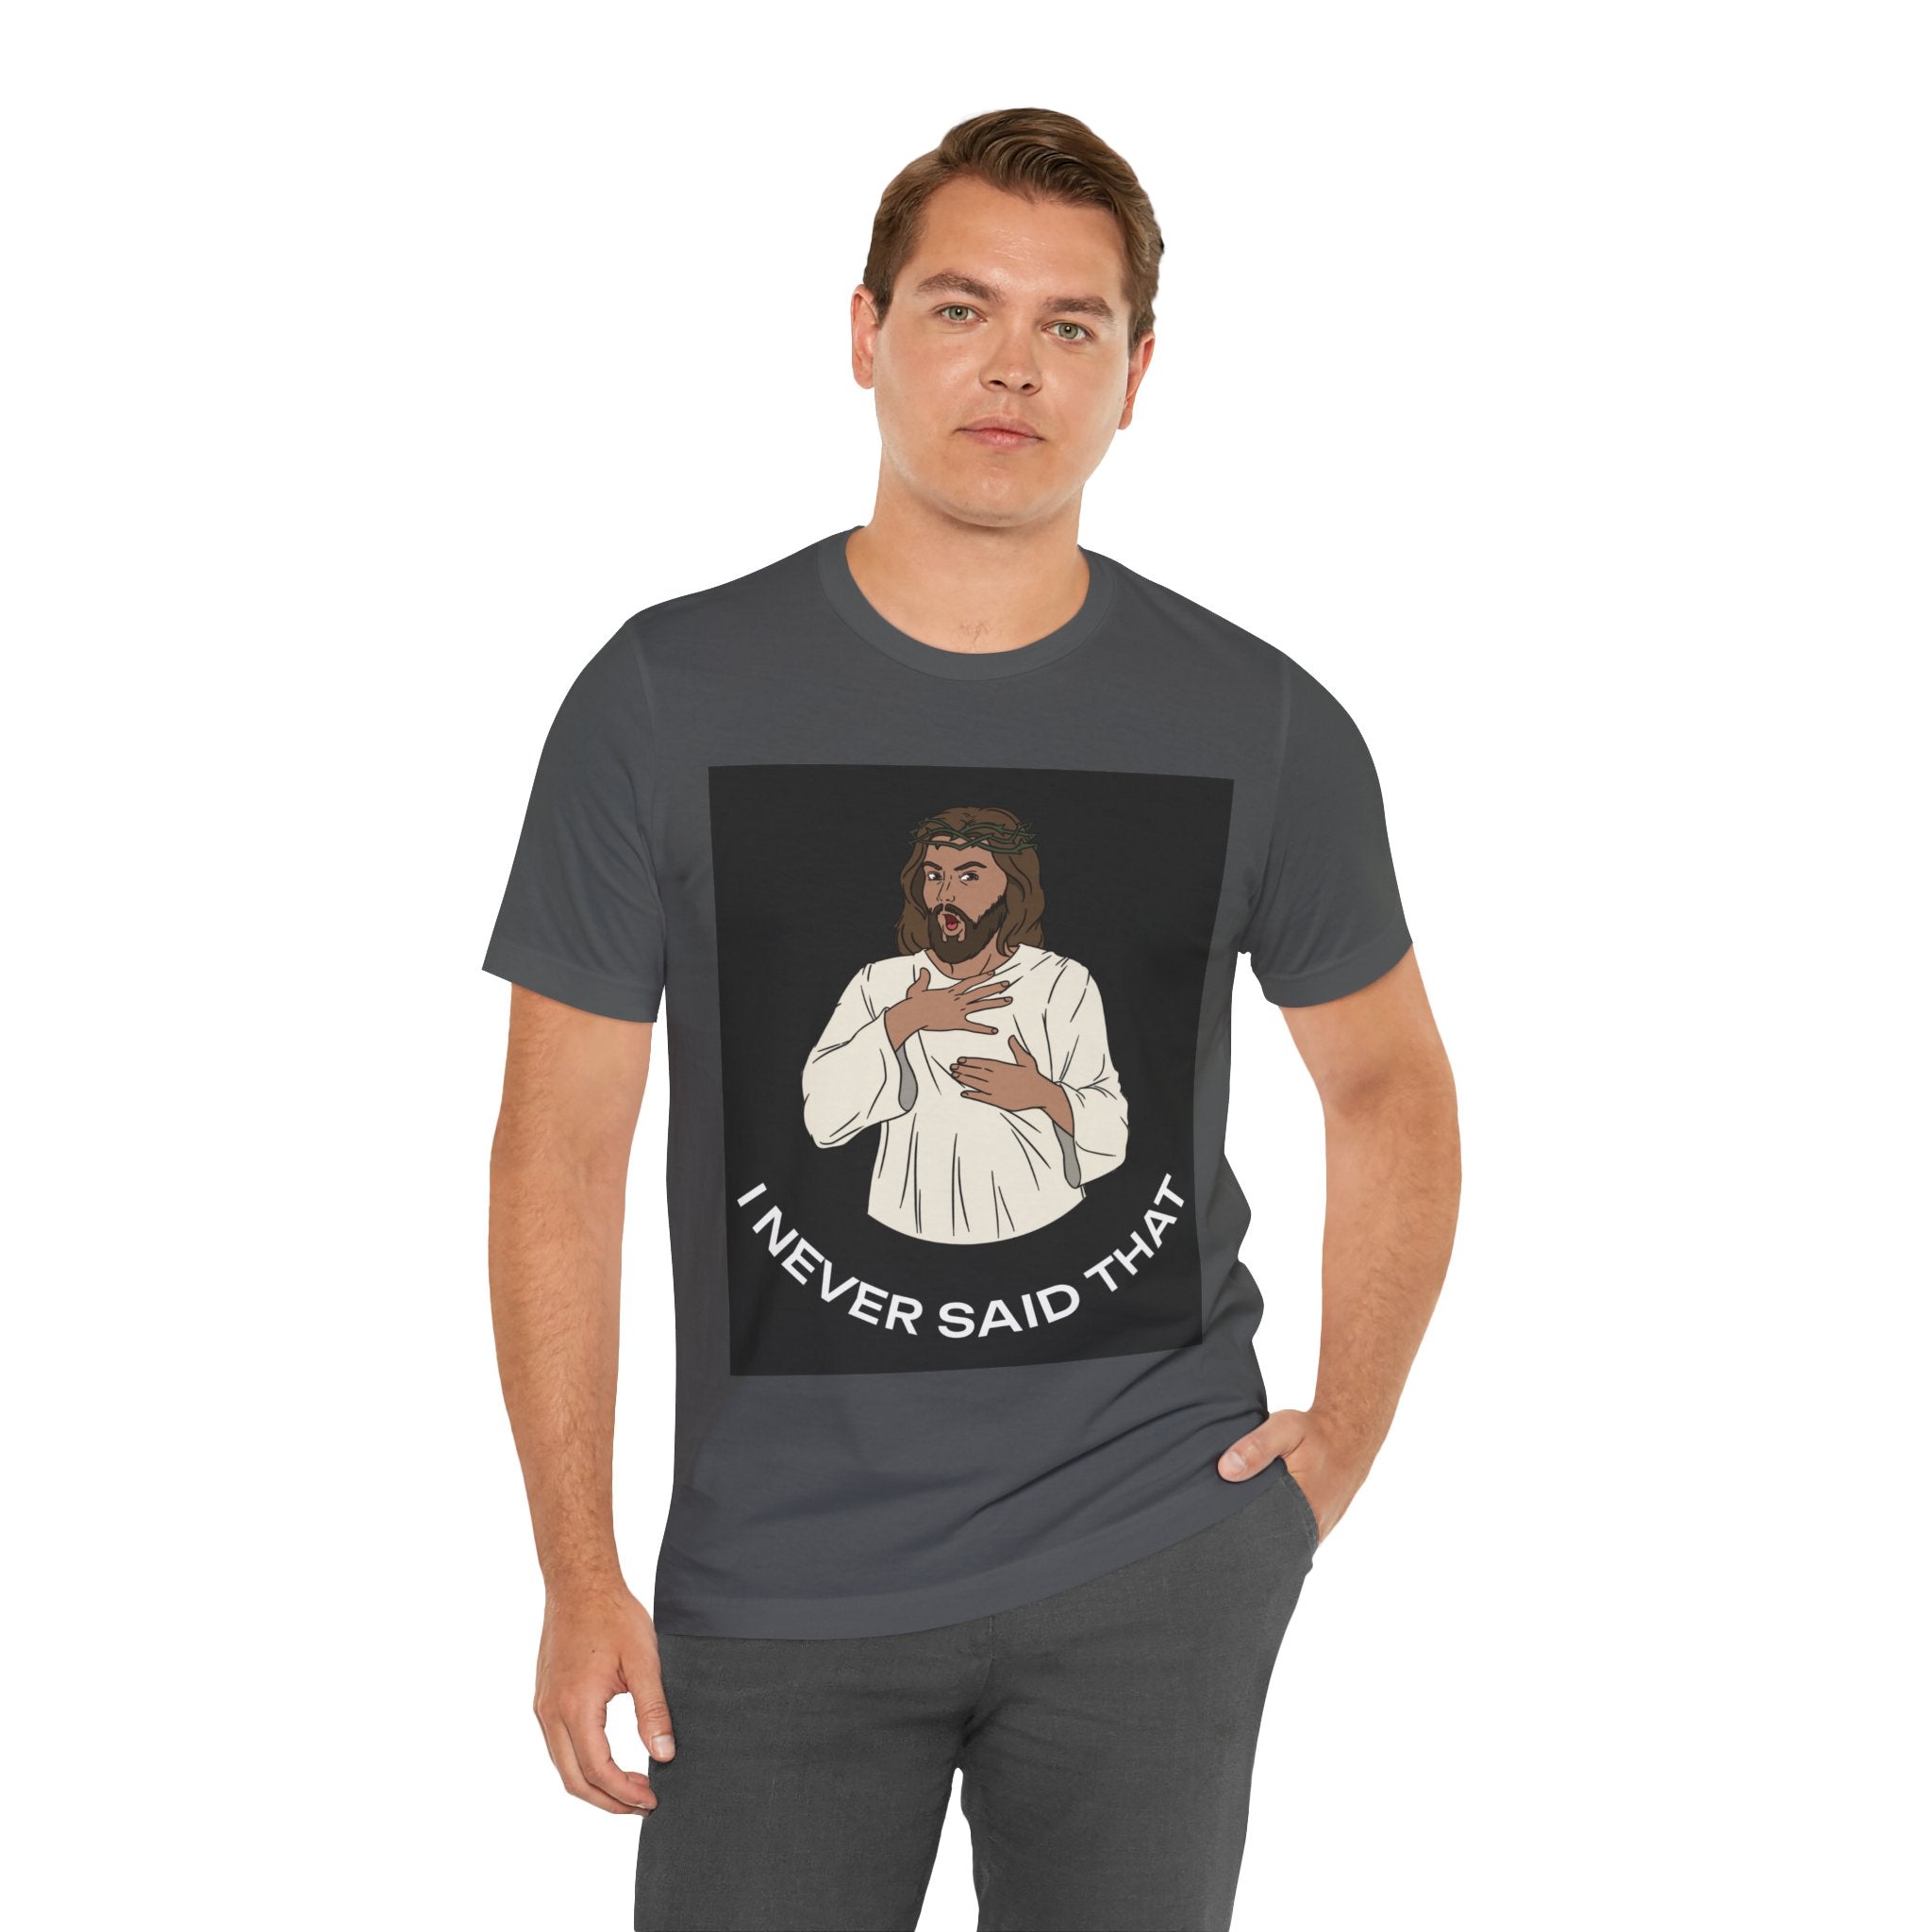 The image displays a stylish unisex jersey tee featuring the phrase "I Never Said That..." in bold, eye-catching letters, attributed humorously to Jesus. The shirt's quality and comfort are apparent, making it an appealing choice for those looking to express their faith with a touch of levity